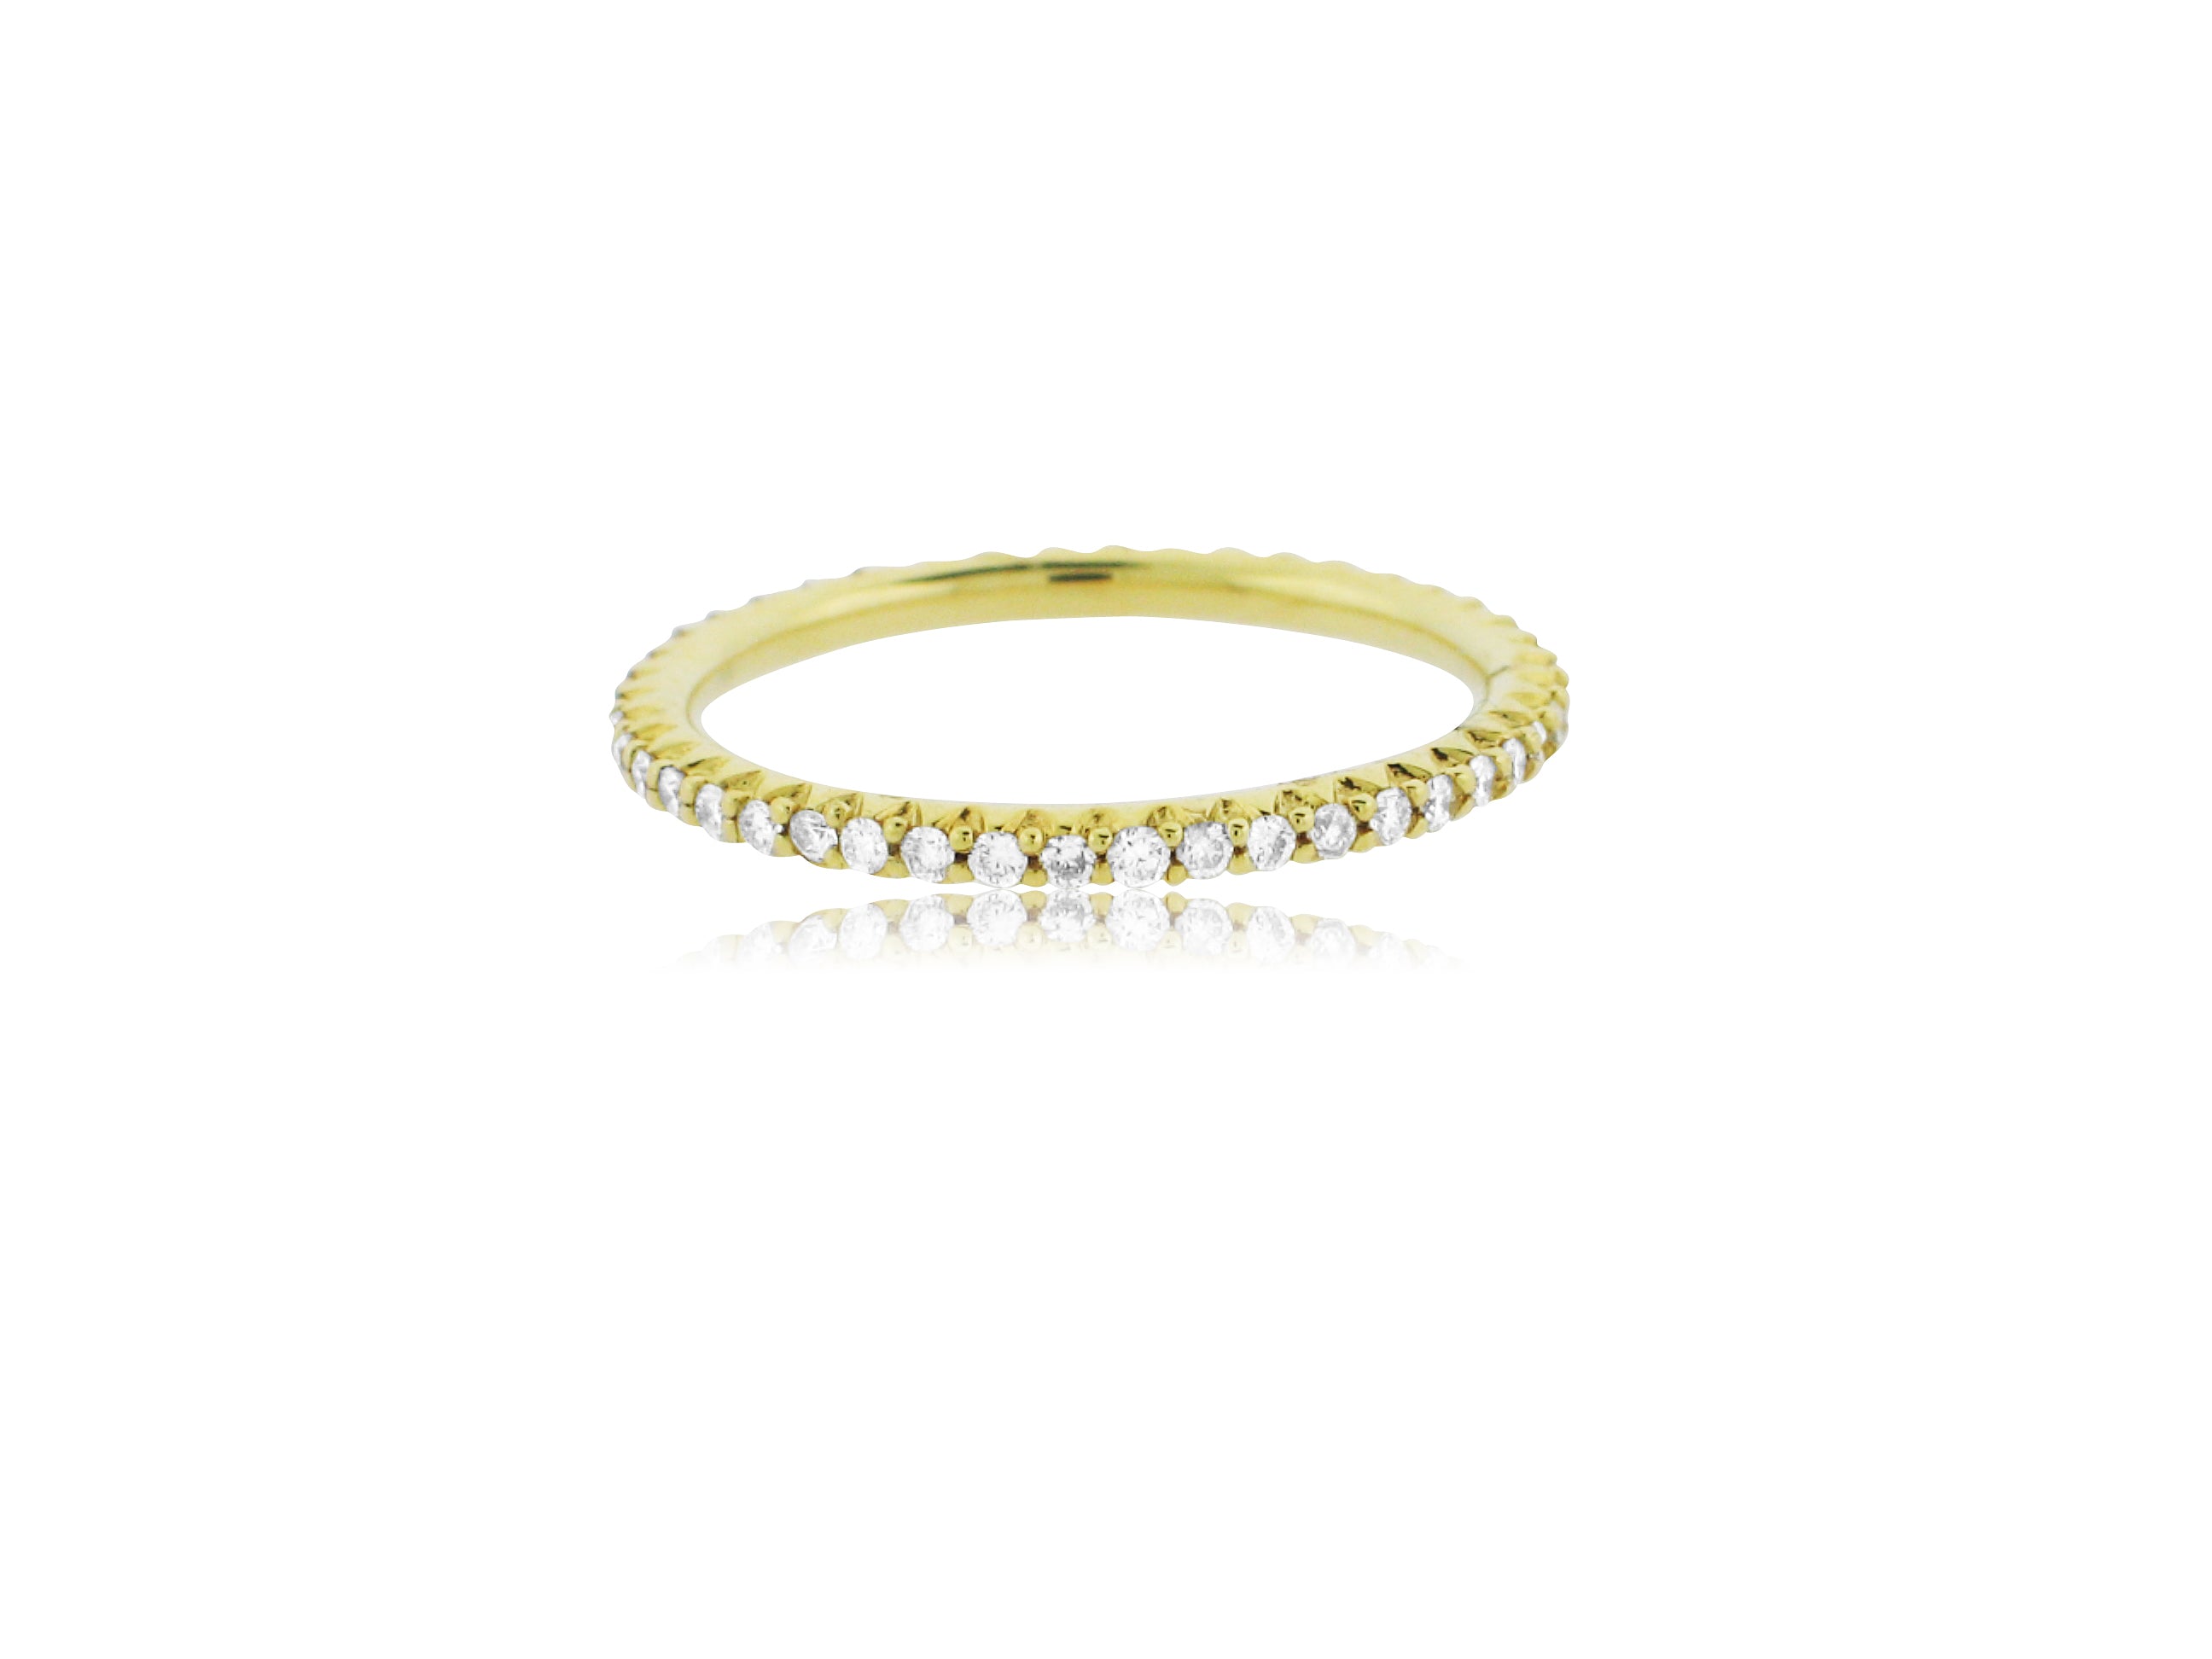 ROBERTO COIN 18K YELLOW GOLD 0.37CT SI/G DIAMOND BAND FROM THE DIAMOND COLLECTION